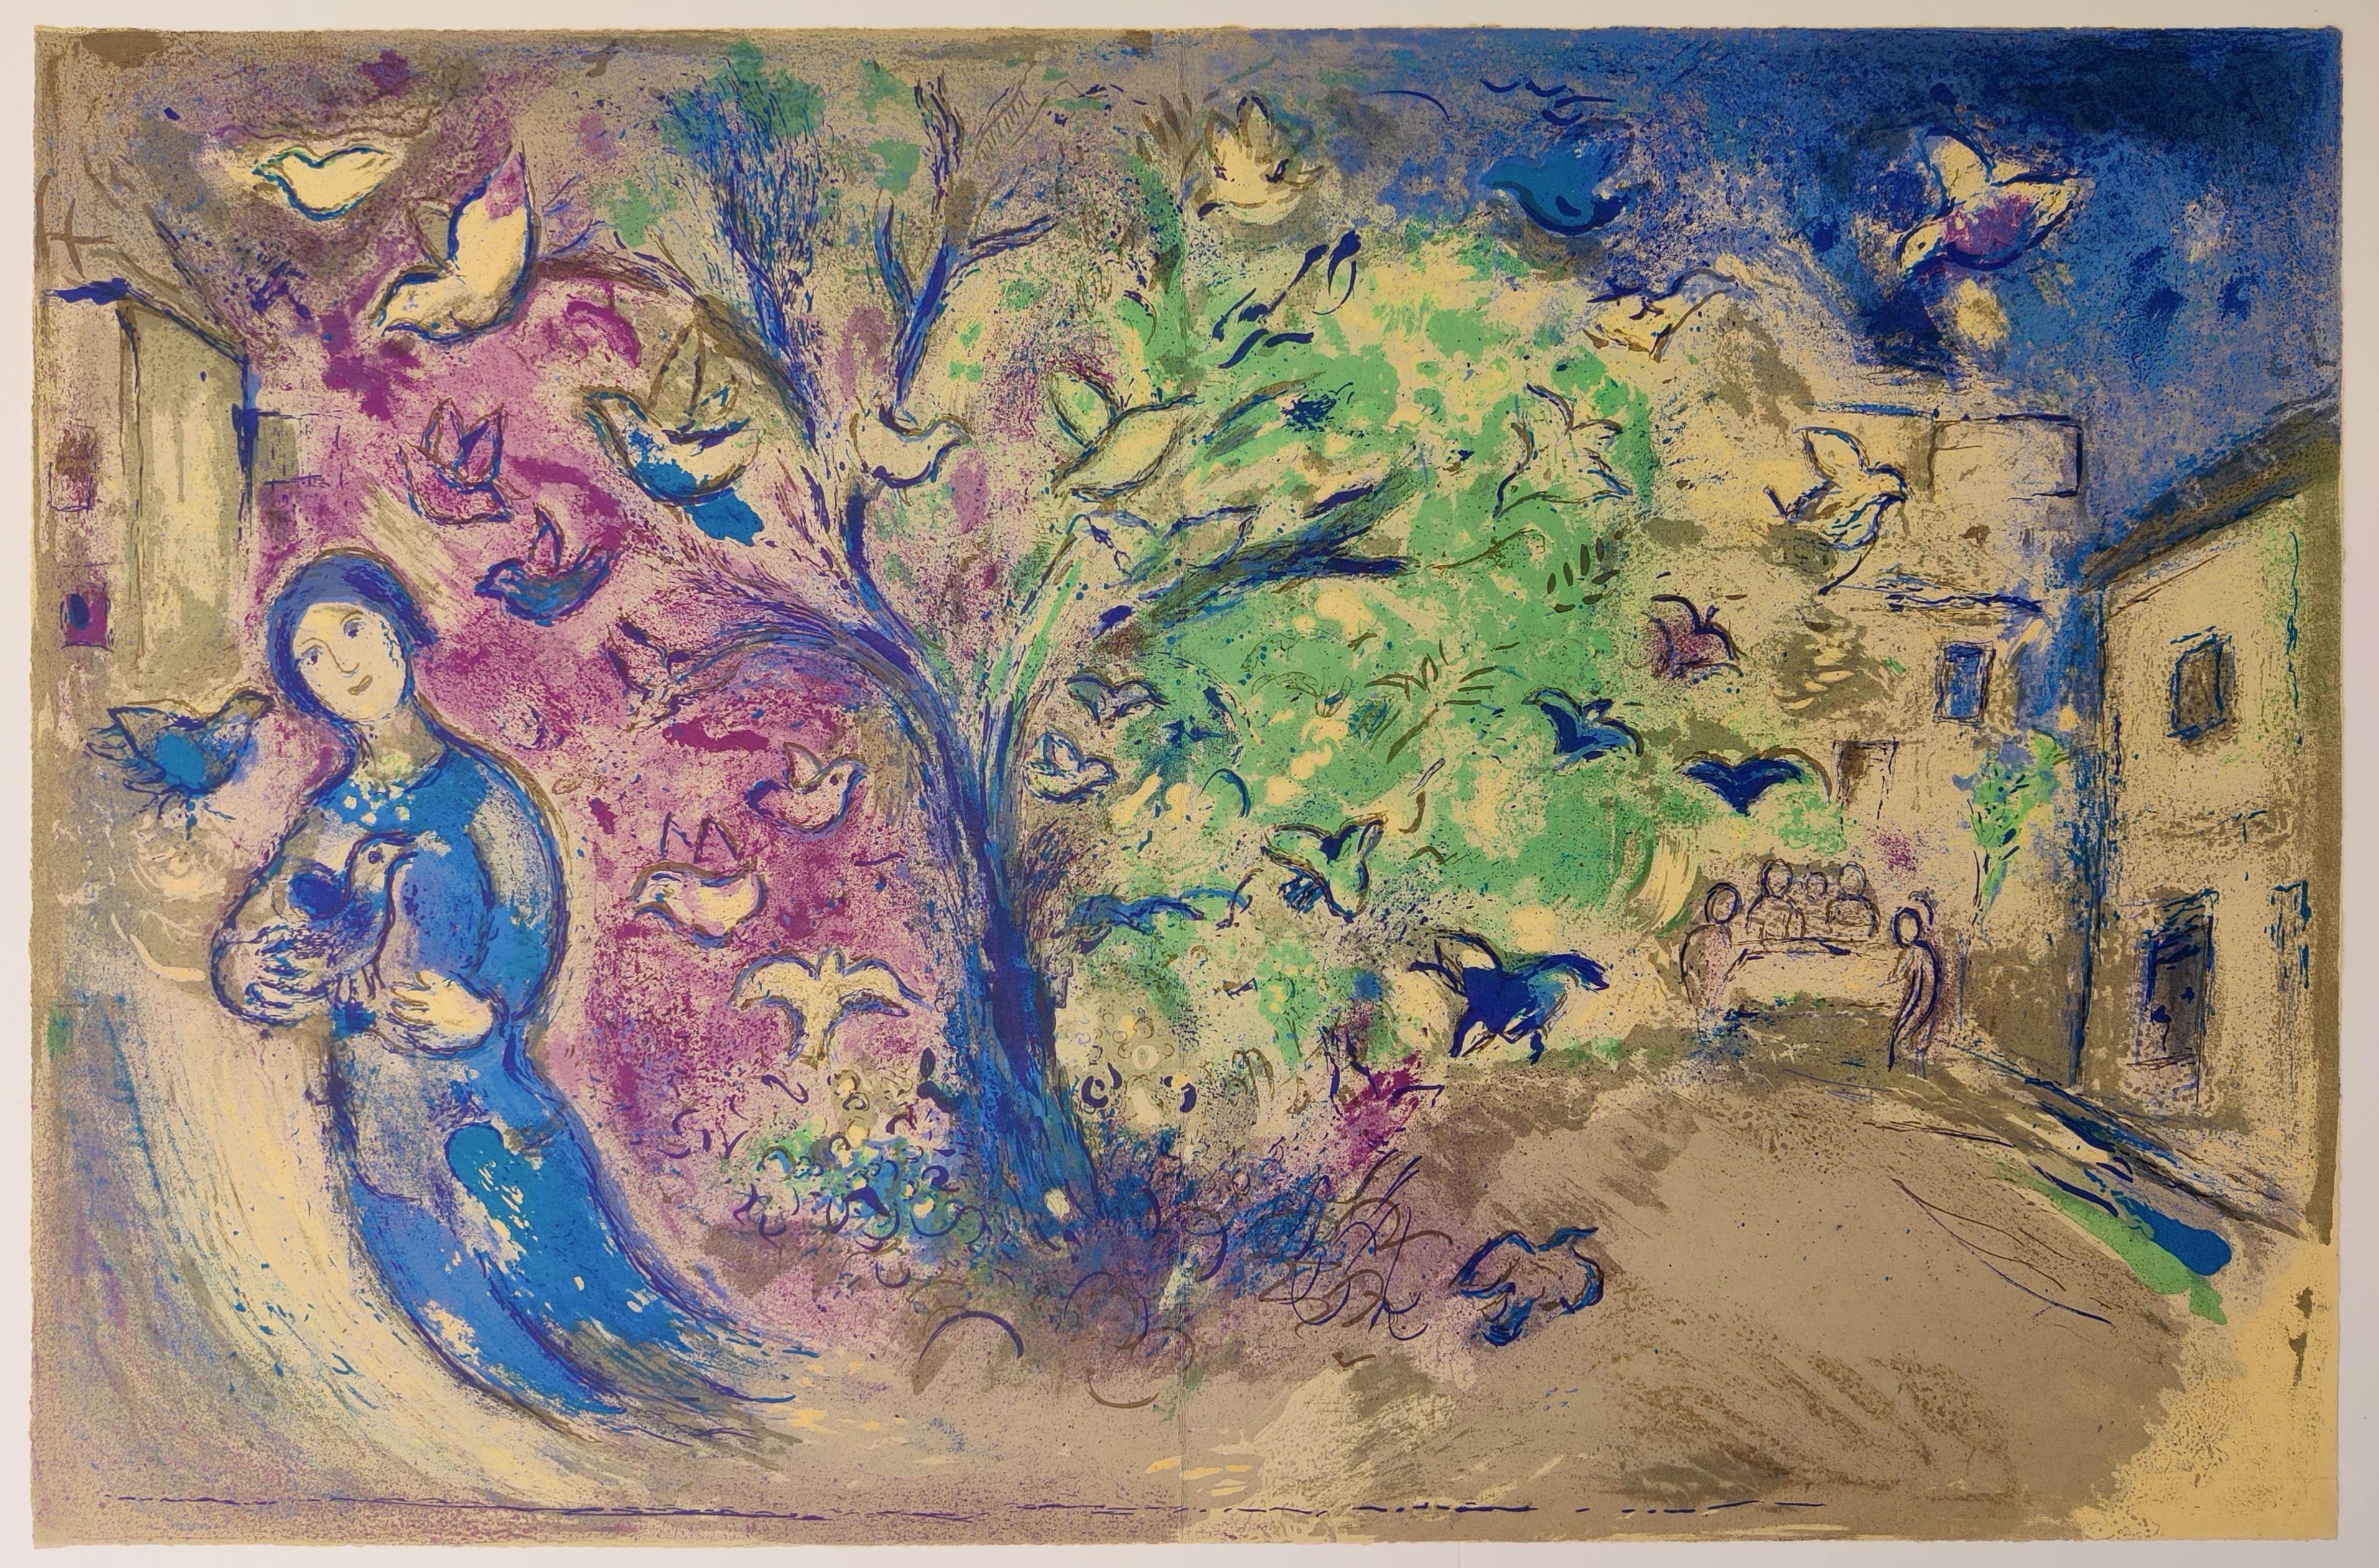 Marc Chagall 
Title: La Chasse aux Oiseaux (The Bird Chase), from Daphnis et Chloé, 1961
Color lithograph on Arches paper
Folded as issued
Size: 64 x 42 cm
Unsigned
This is an unsigned edition from the total edition of 250 
Reference:	Mourlot 329
